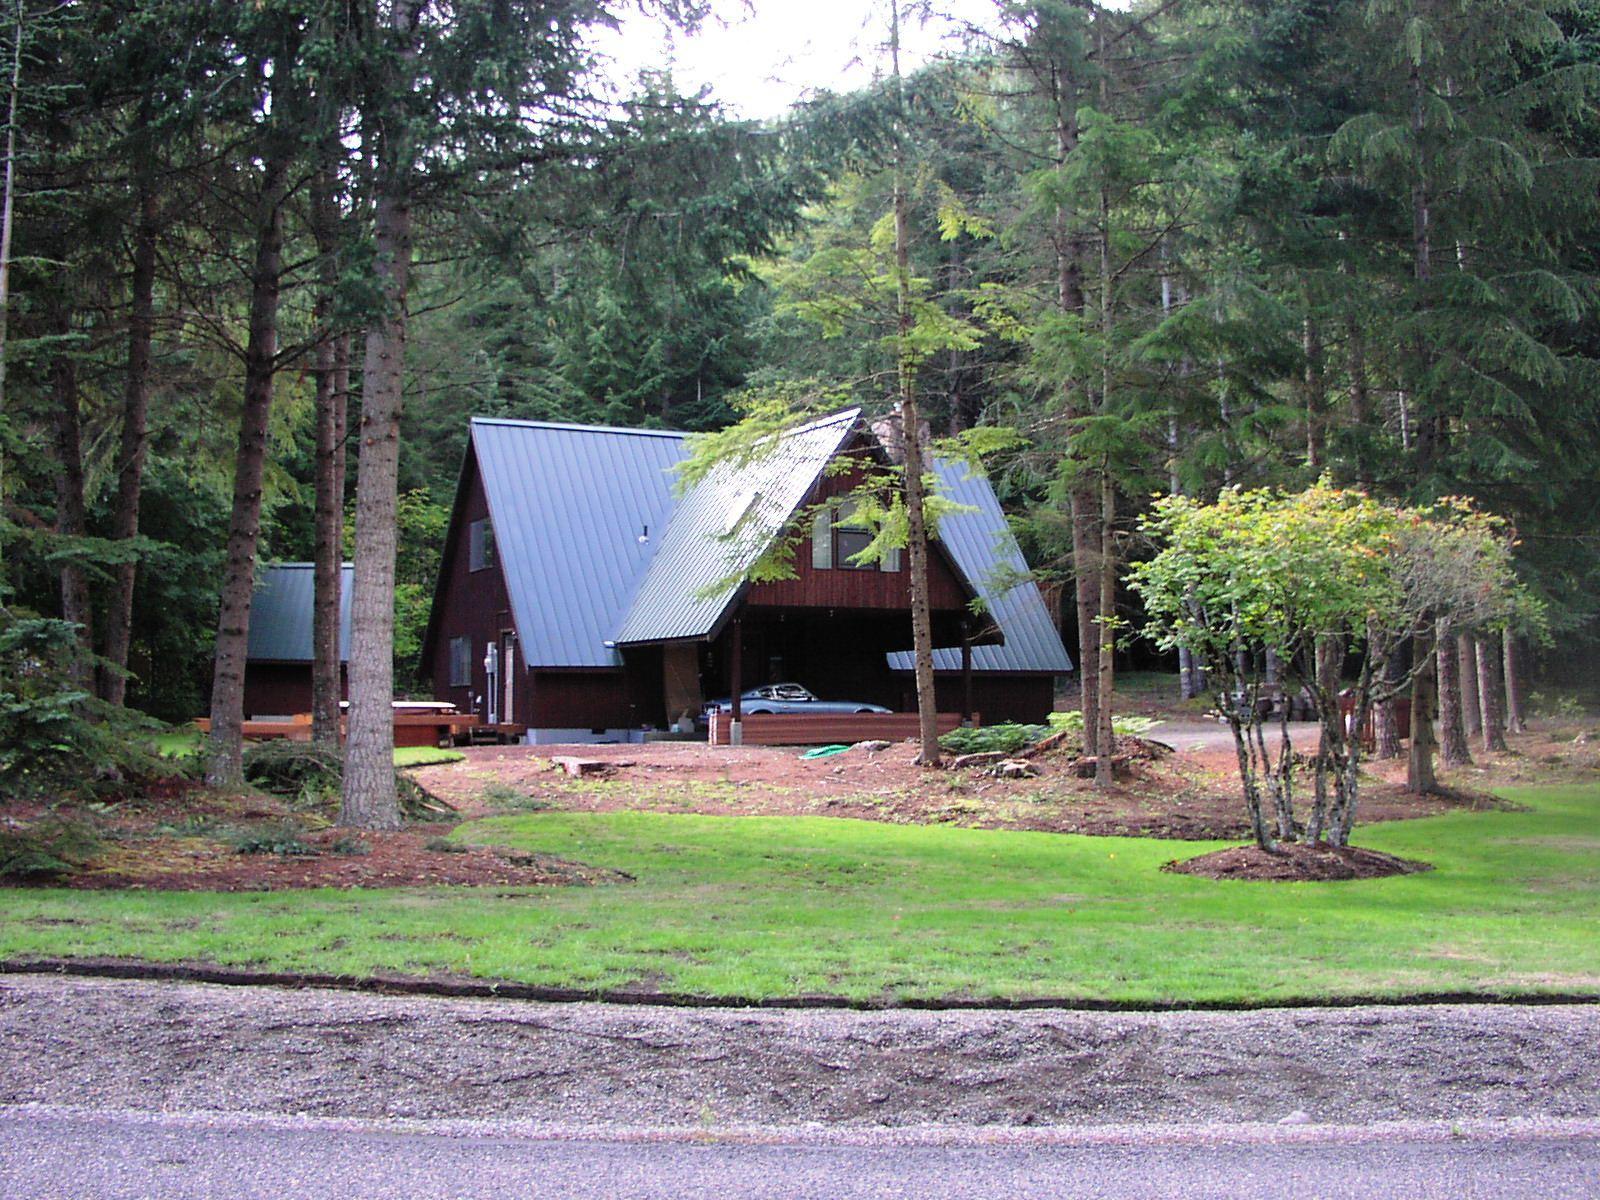 A home surrounded by woods